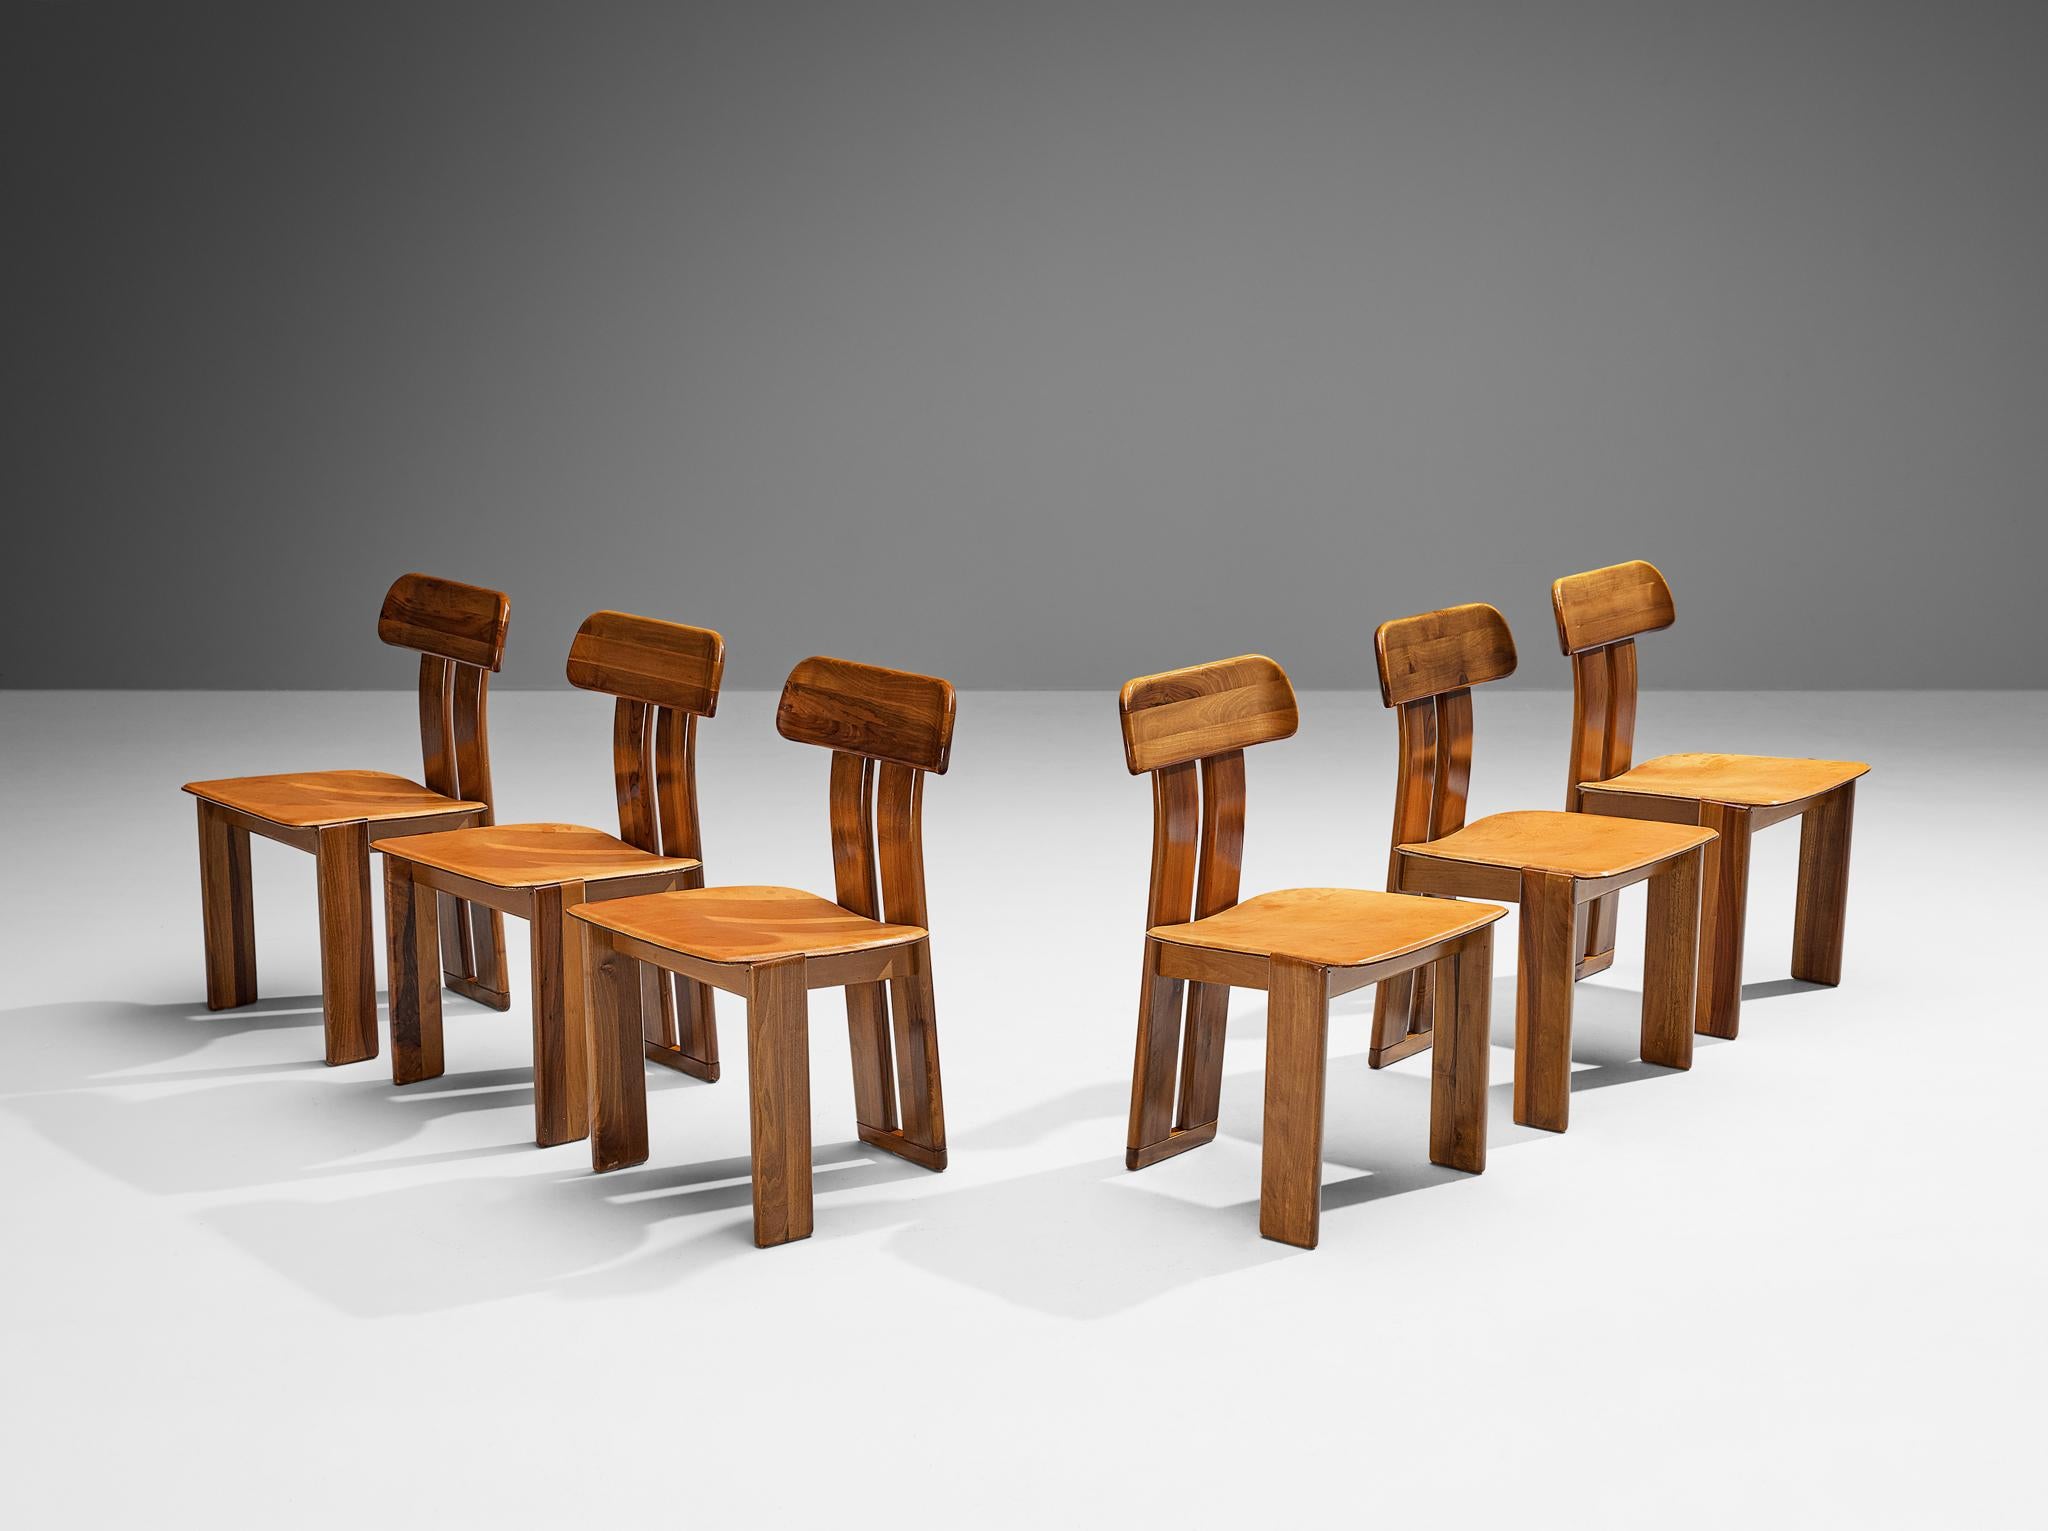 Mario Marenco for Mobil Girgi, set of six dining chairs model ‘Sapporo’, walnut, brown leather, Italy, 1970s

Beautiful set of six dining chairs in walnut and brown leather designed by Mario Marenco in the 1970s. These chairs feature wonderful